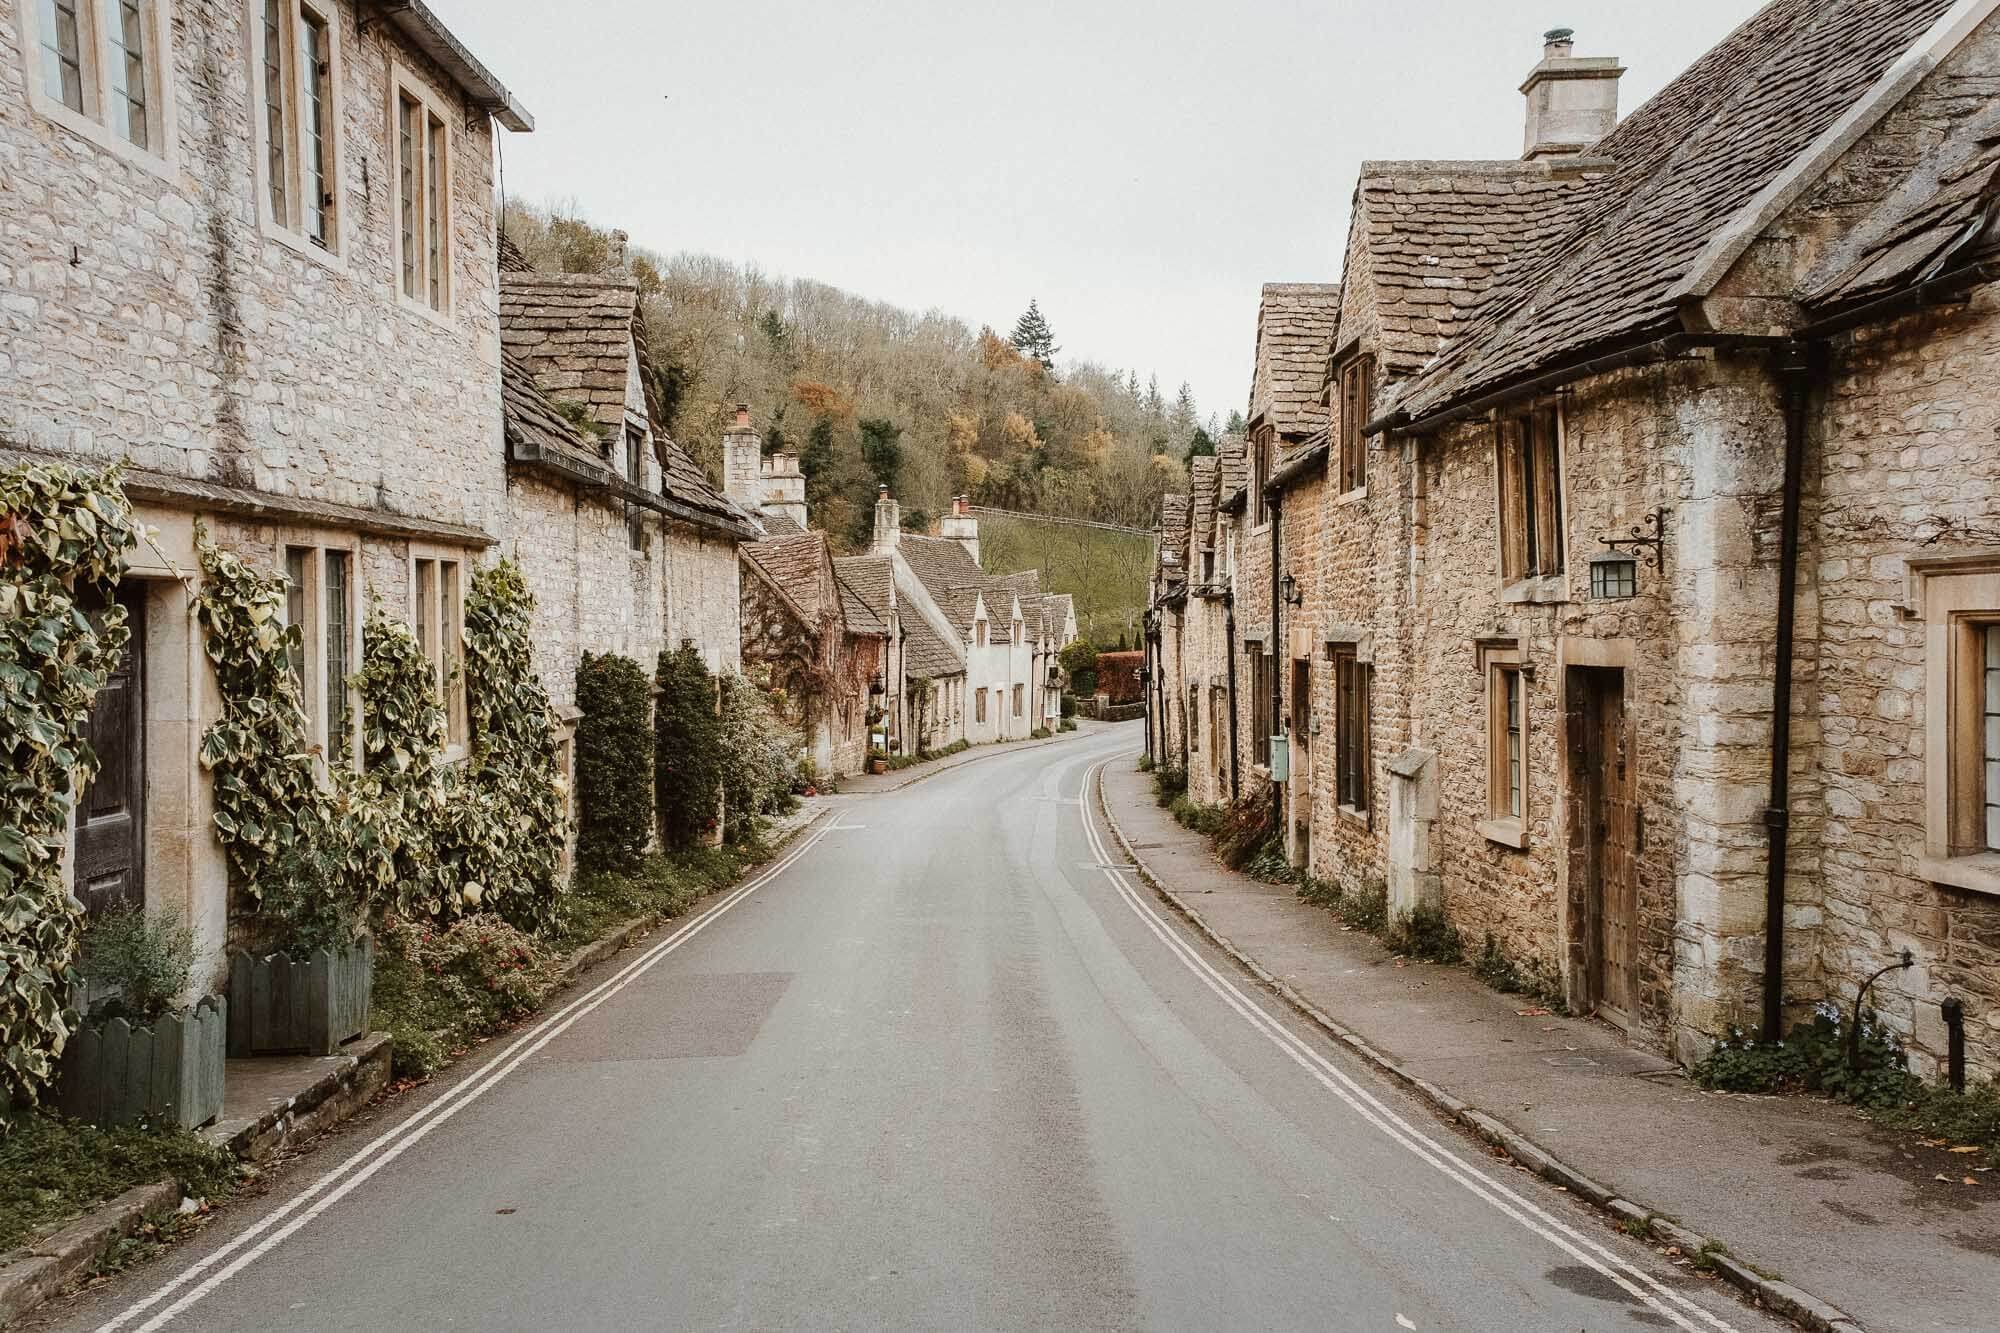 Best things to do in London: if you have the time, a day trip to the Cotswolds is a must do in London